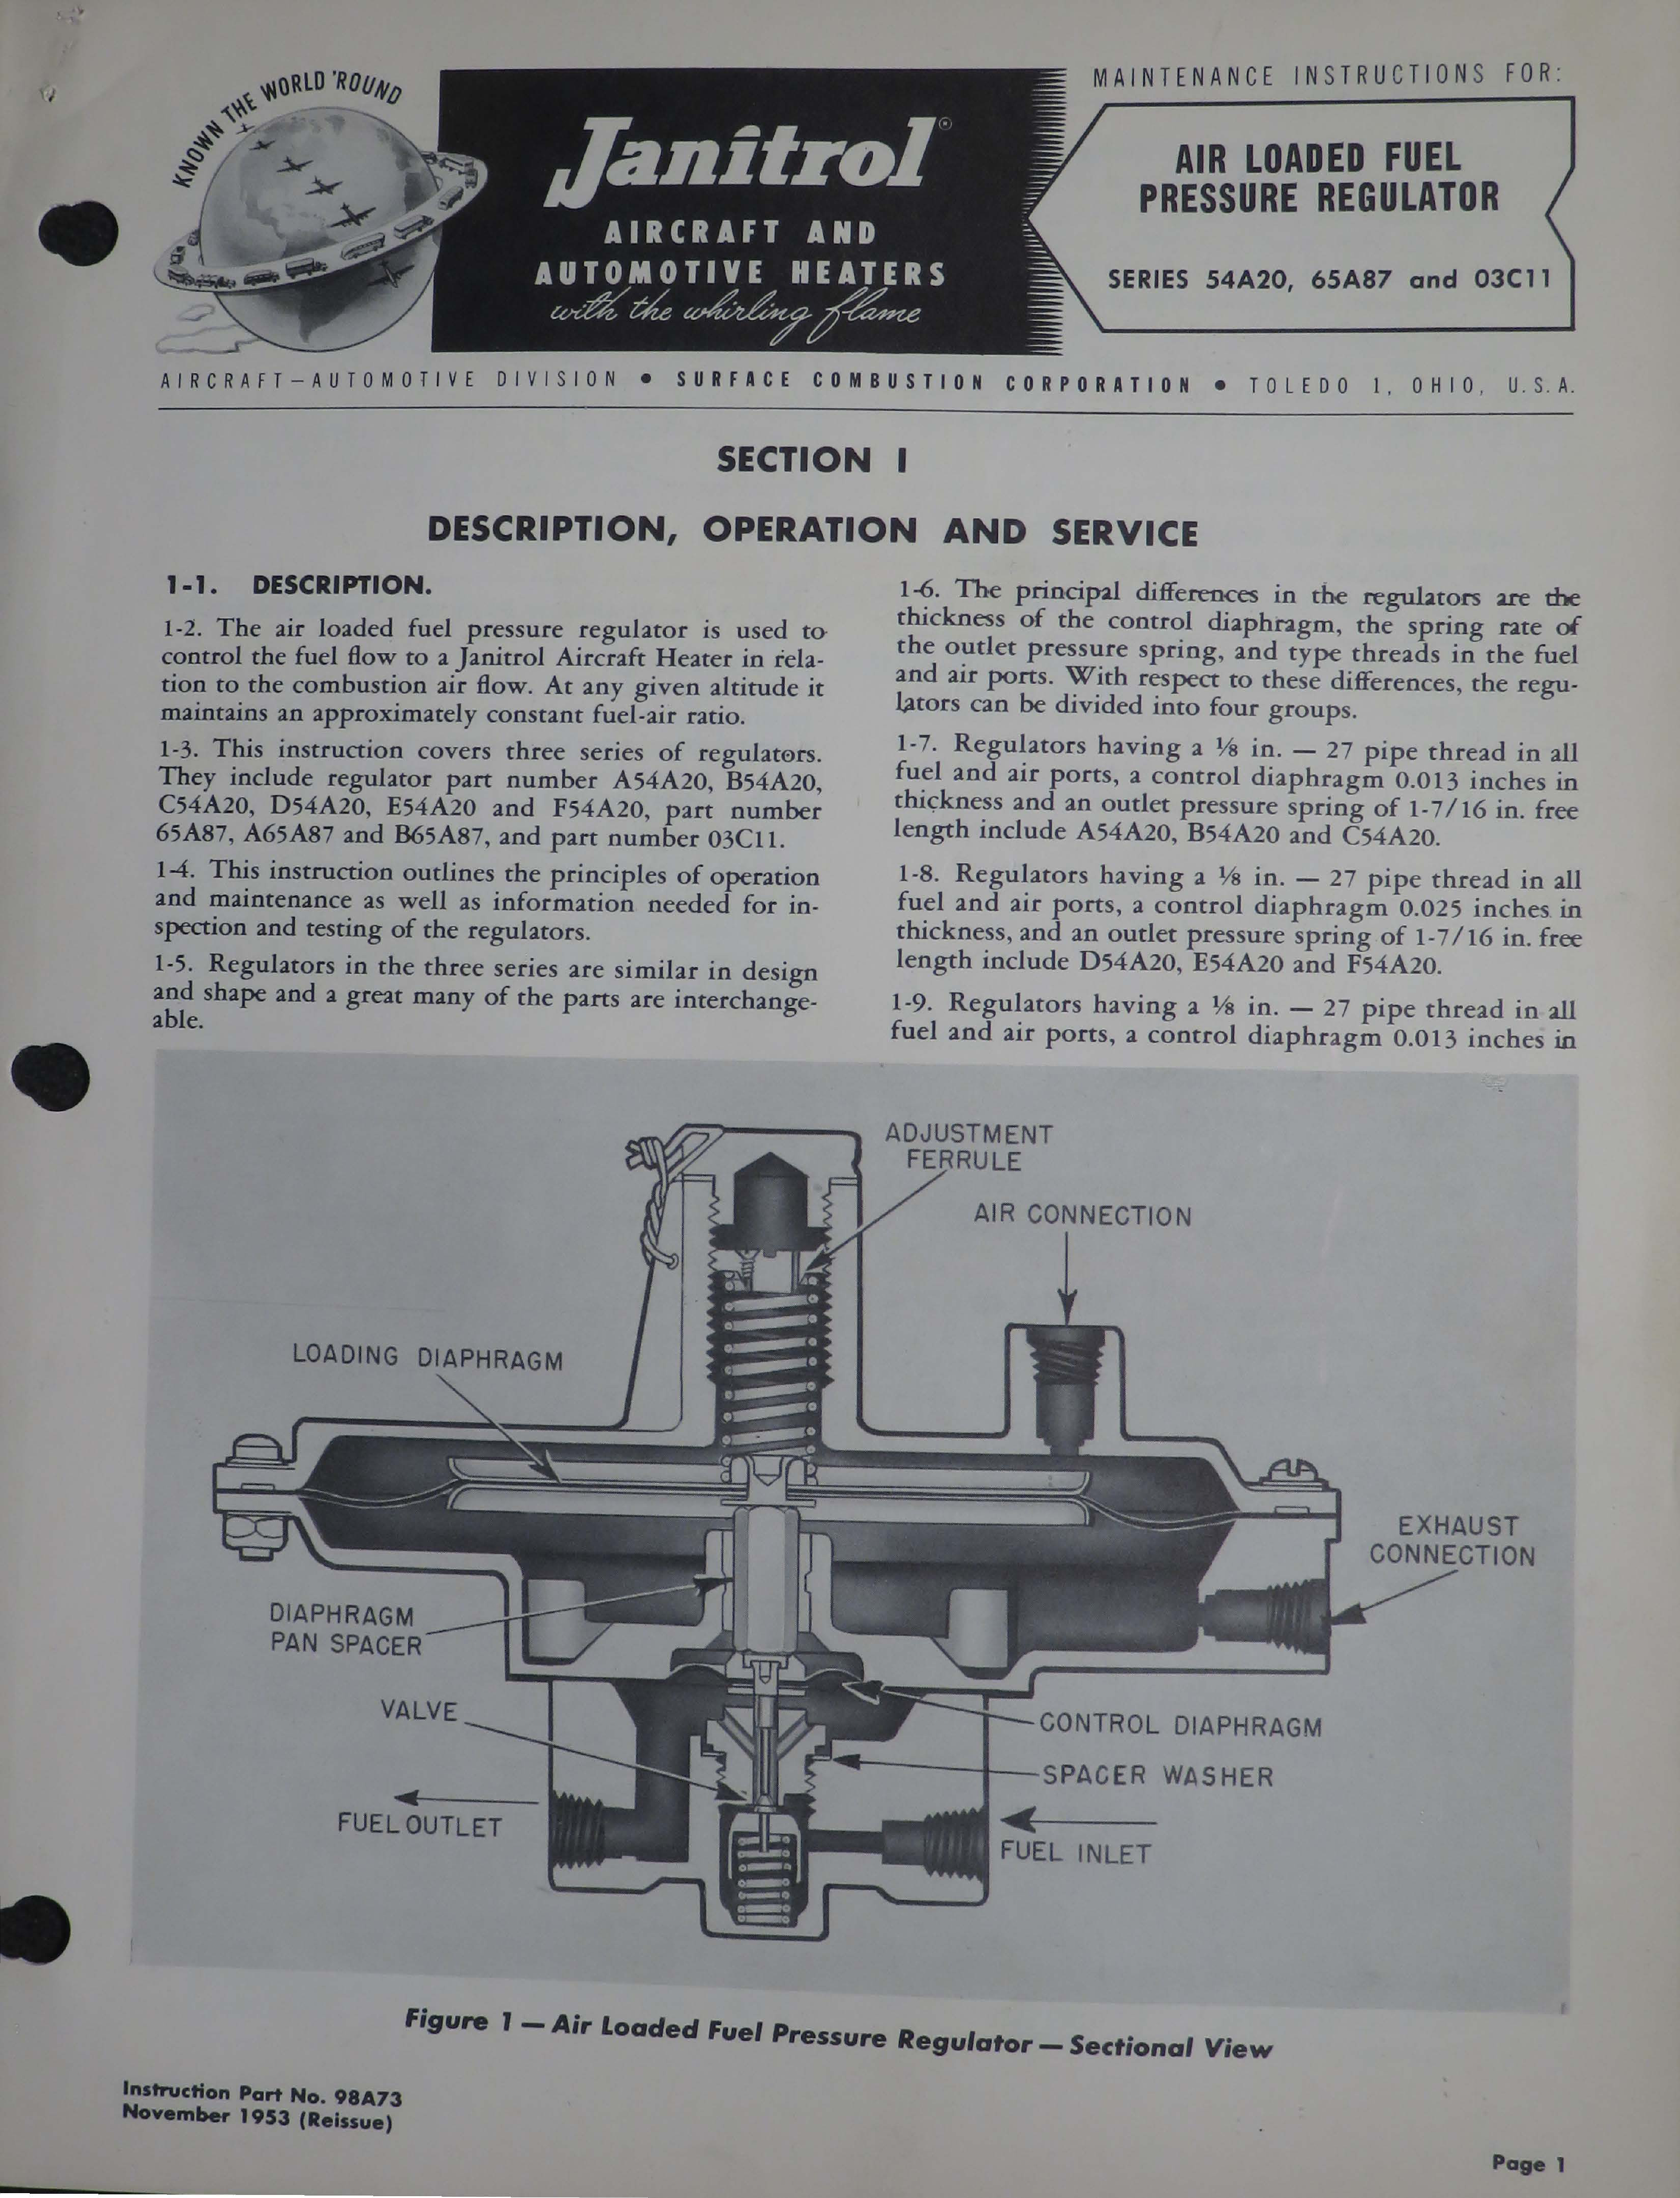 Sample page 1 from AirCorps Library document: Maintenance Instructions for Air Loaded Fuel Pressure Regulator - Series 54A20, 65A87 and 03C11